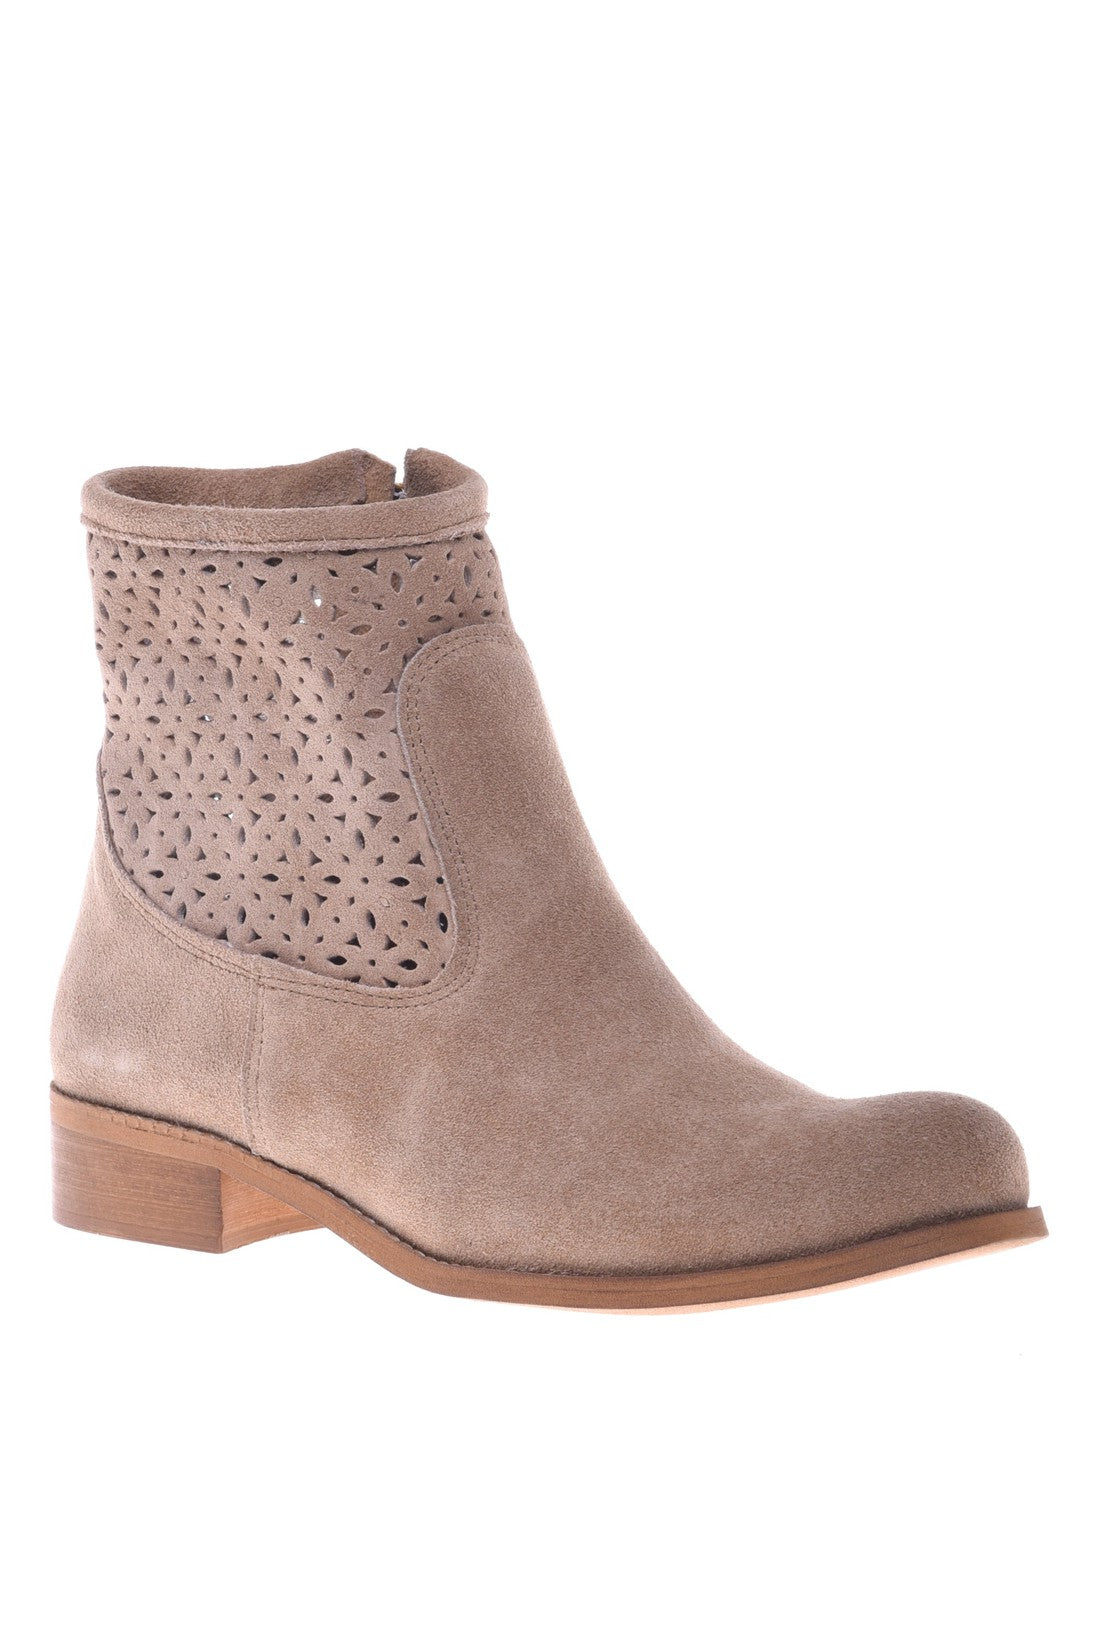 BALDININI-OUTLET-SALE-Ballerina-pump-in-taupe-suede-Stiefel-Stiefeletten-35-ARCHIVE-COLLECTION_135d567a-970d-43bd-8f31-ca51a6ddaa95.jpg